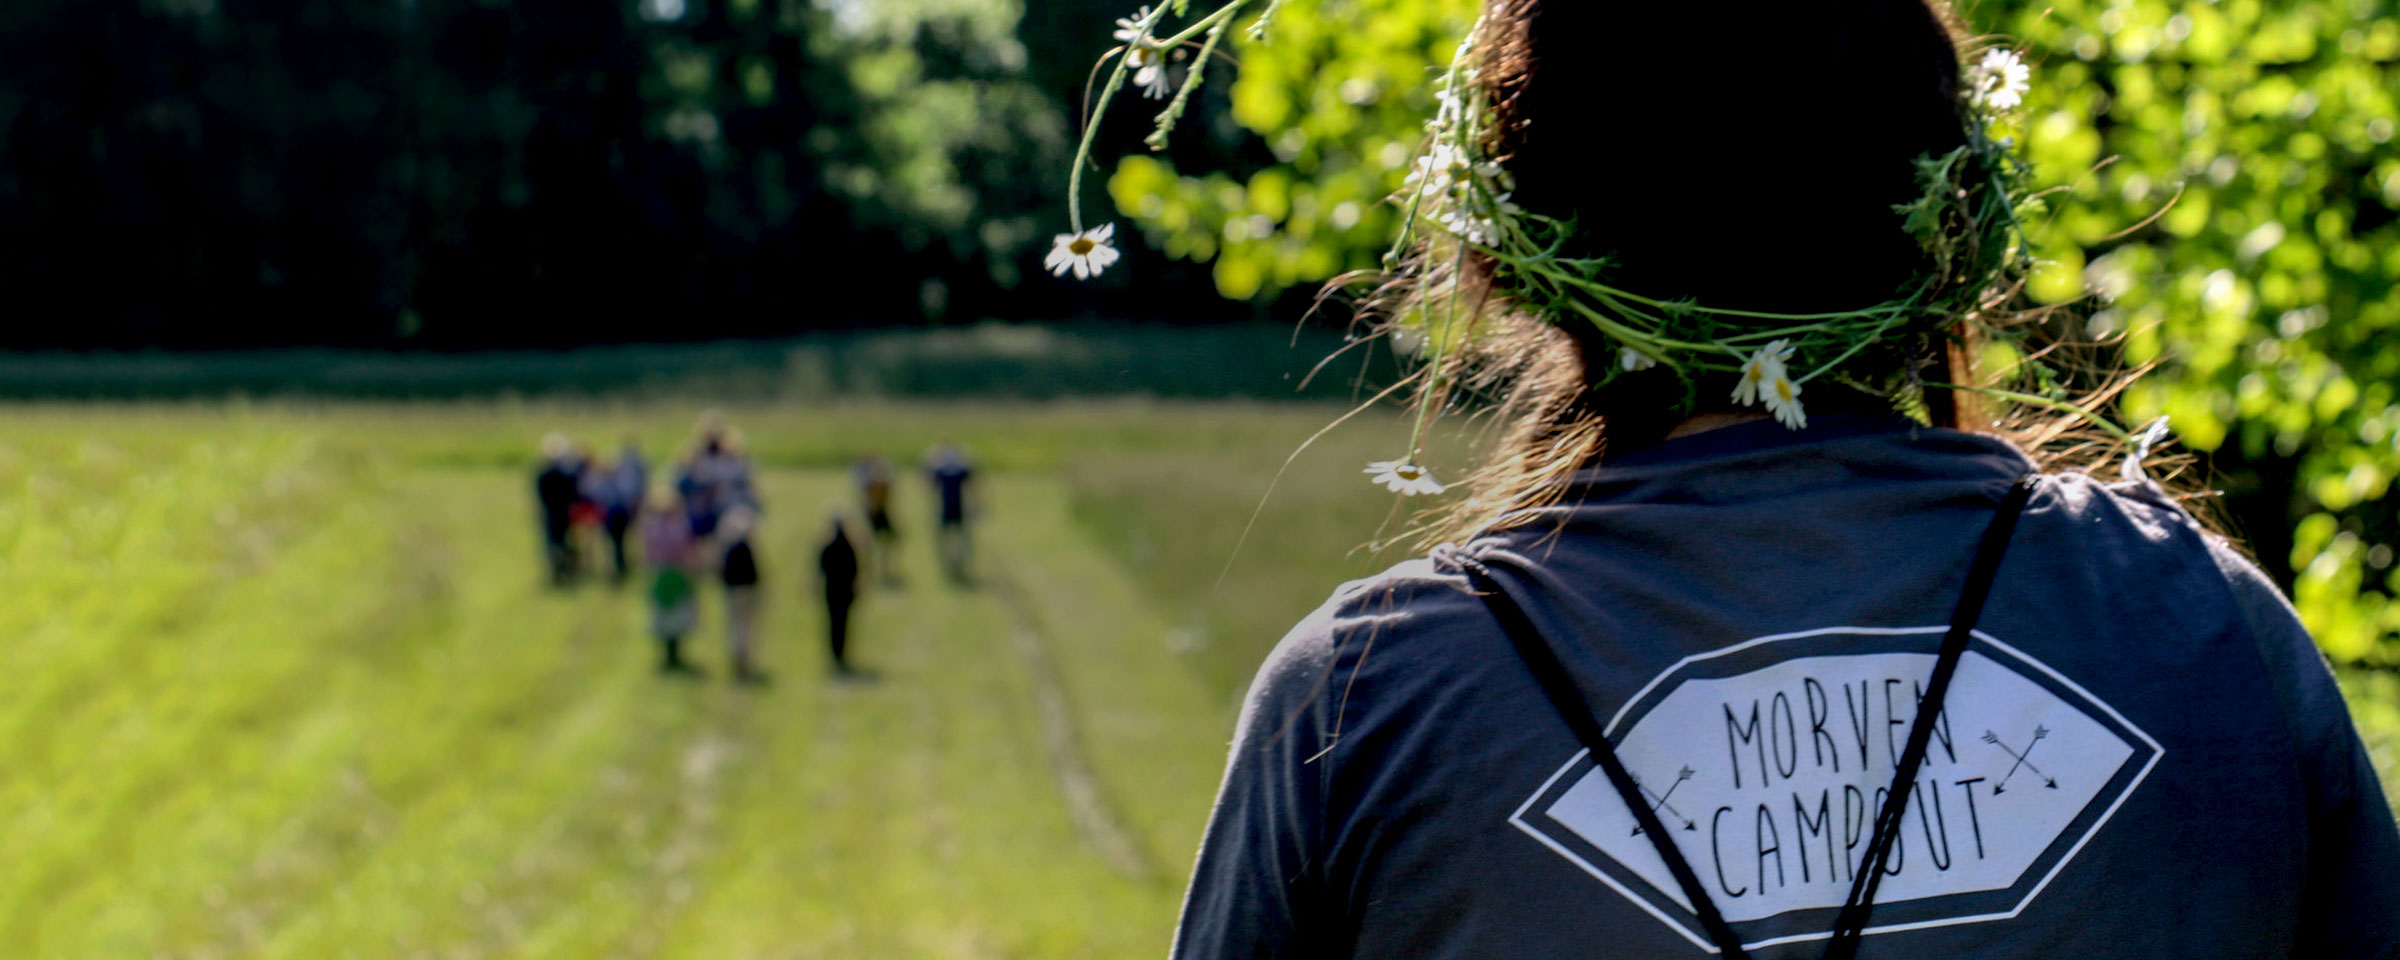 Person standing watching people in a field.  The back of their shirt says Morven Camps